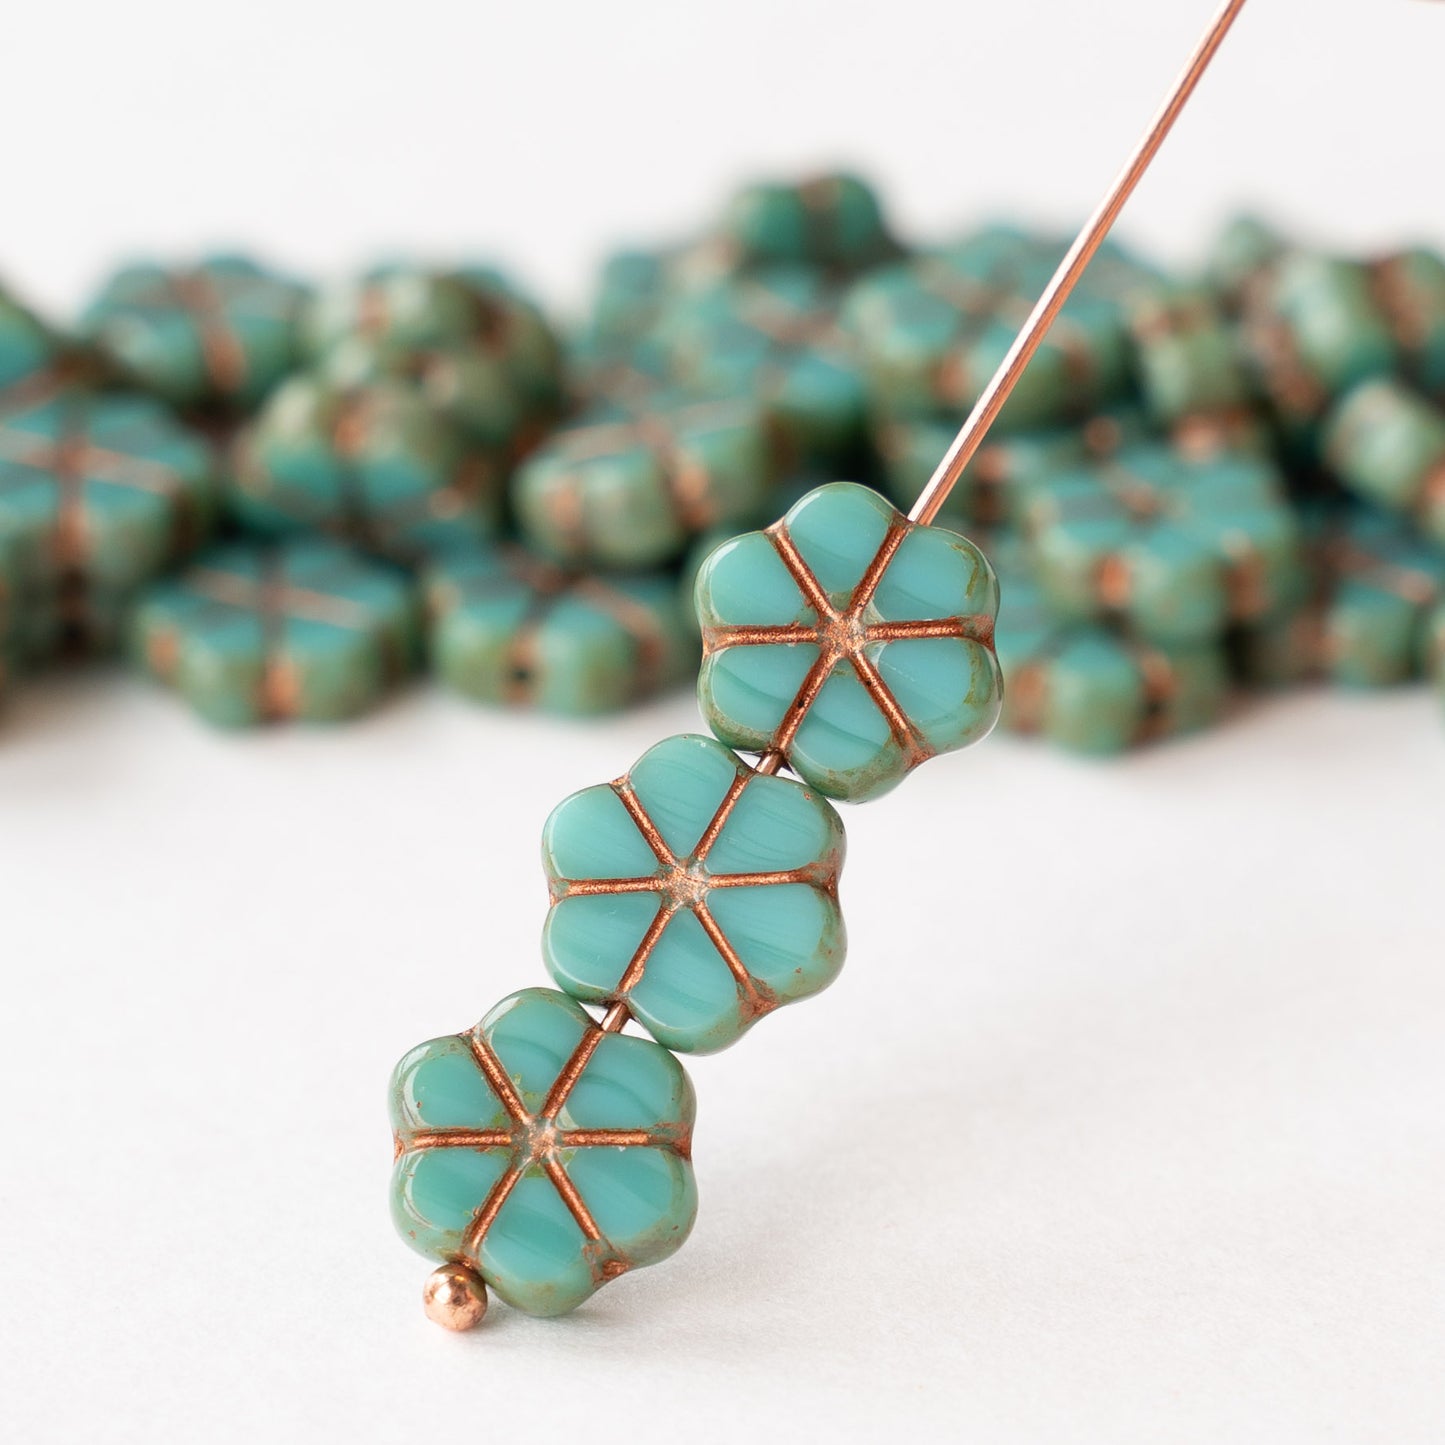 10mm Forget Me Not Flower Beads - Turquoise With Copper Wash - 10 Beads